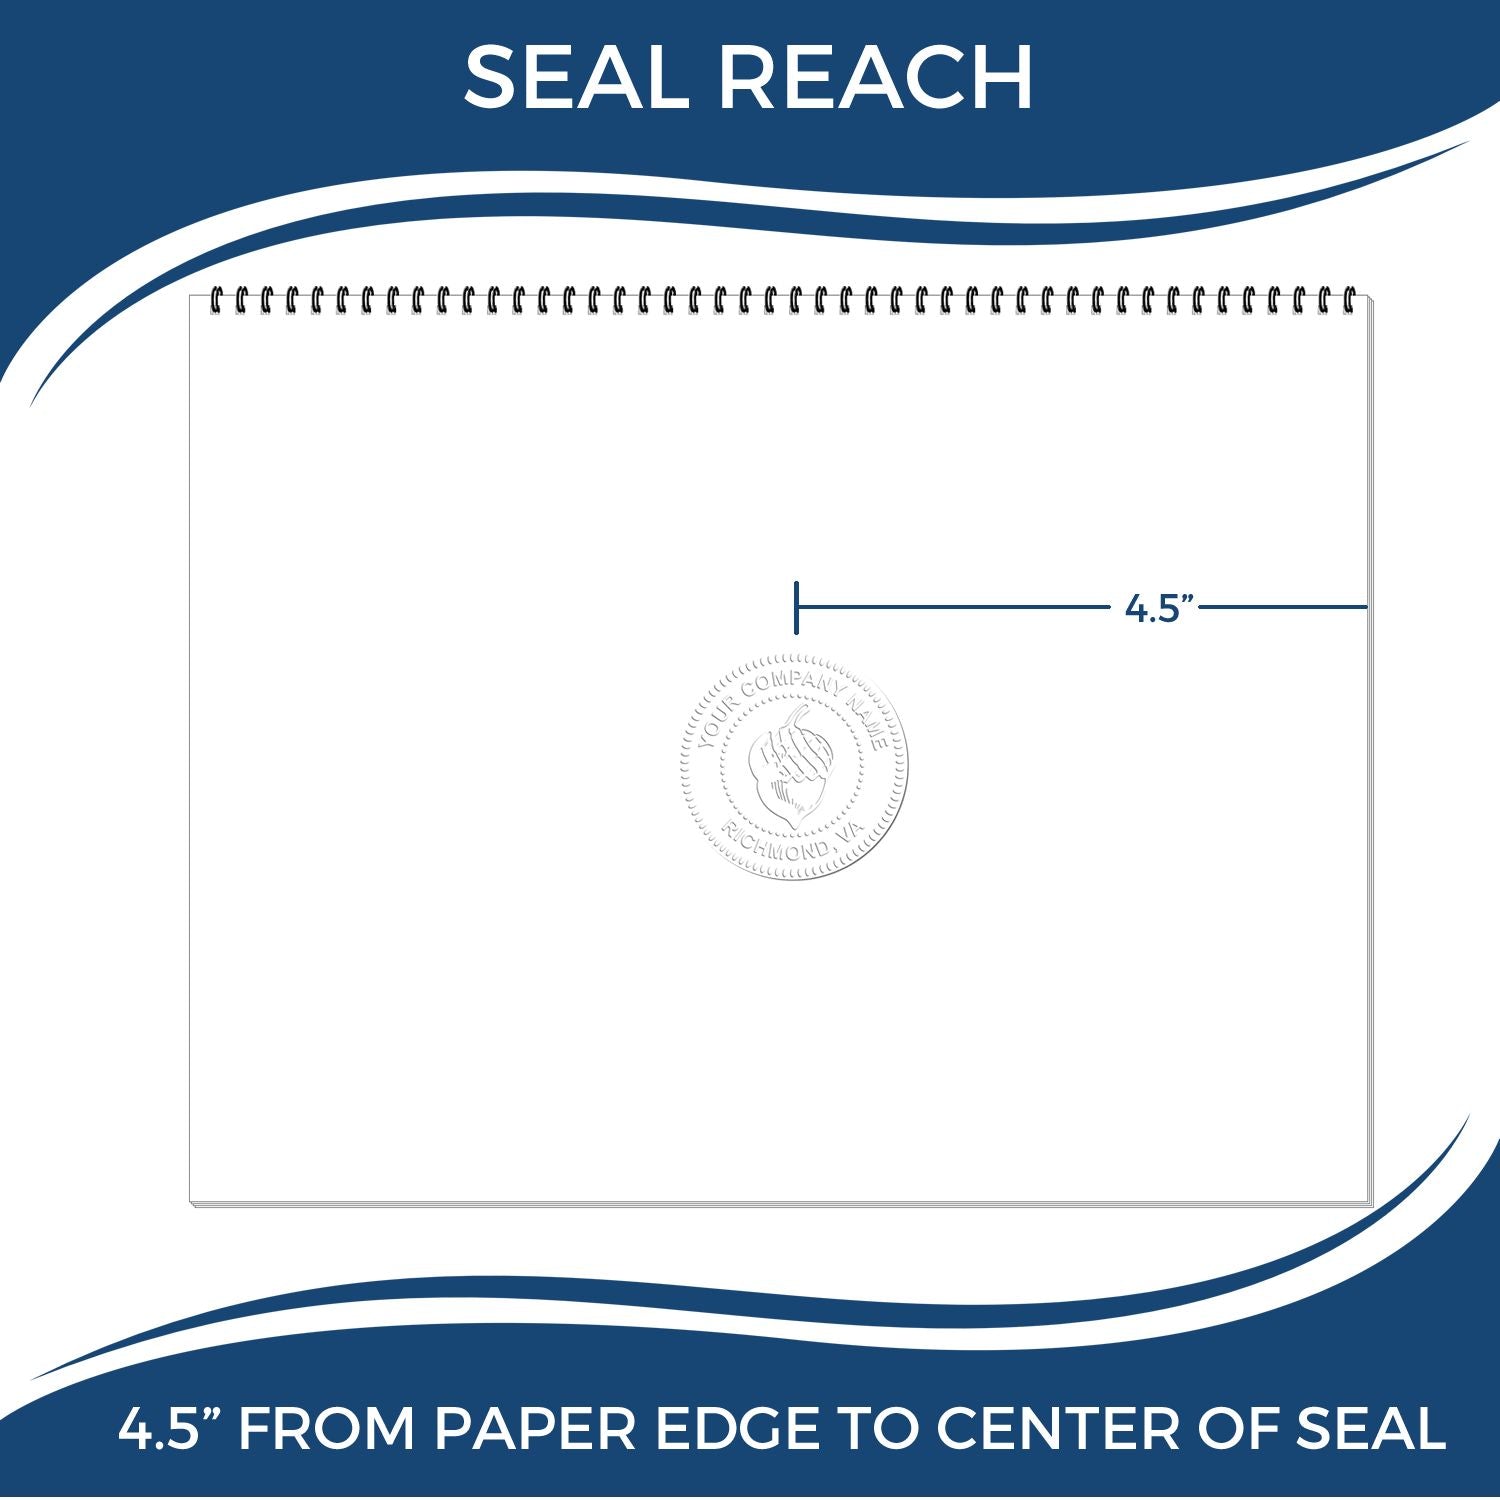 An infographic showing the seal reach which is represented by a ruler and a miniature seal image of the State of Utah Extended Long Reach Geologist Seal